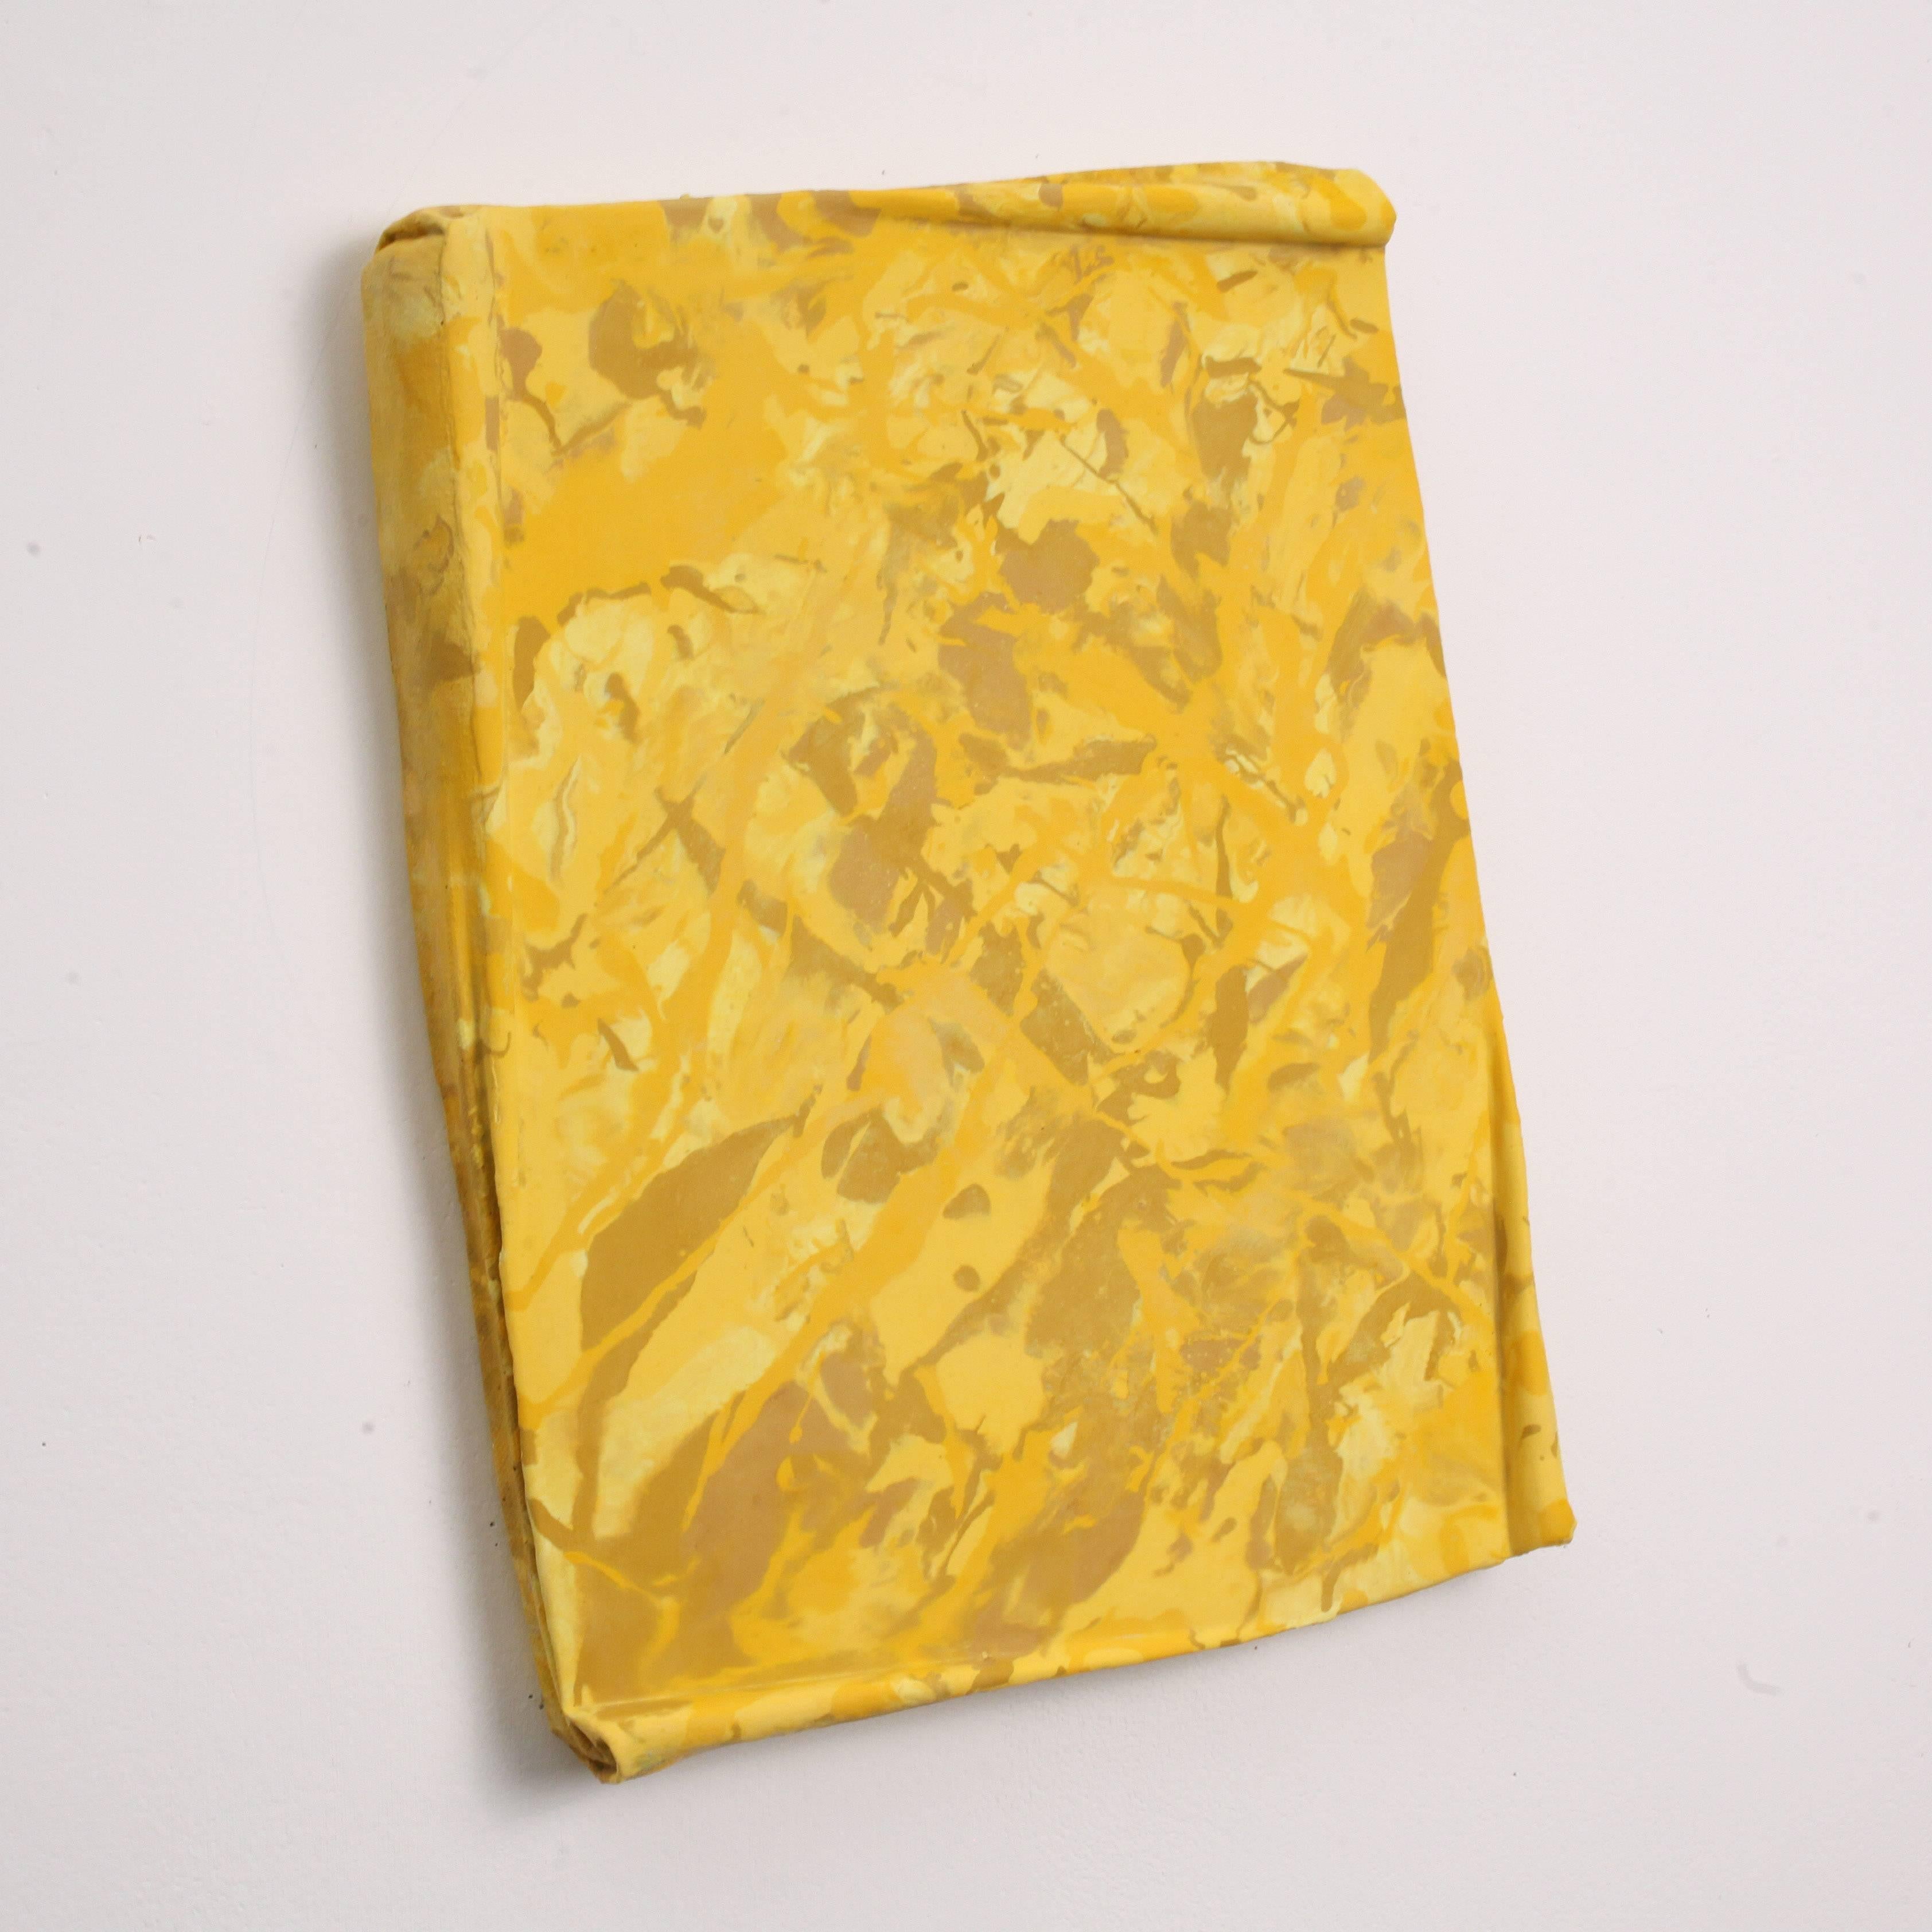 In the work of Mark Hosking it is clear to see an ongoing engagement in function, materiality, and process. With his new series of cast 'Impression' wall relief, the context of painting is inverted and reanimated, by presenting a multi-pigmented,